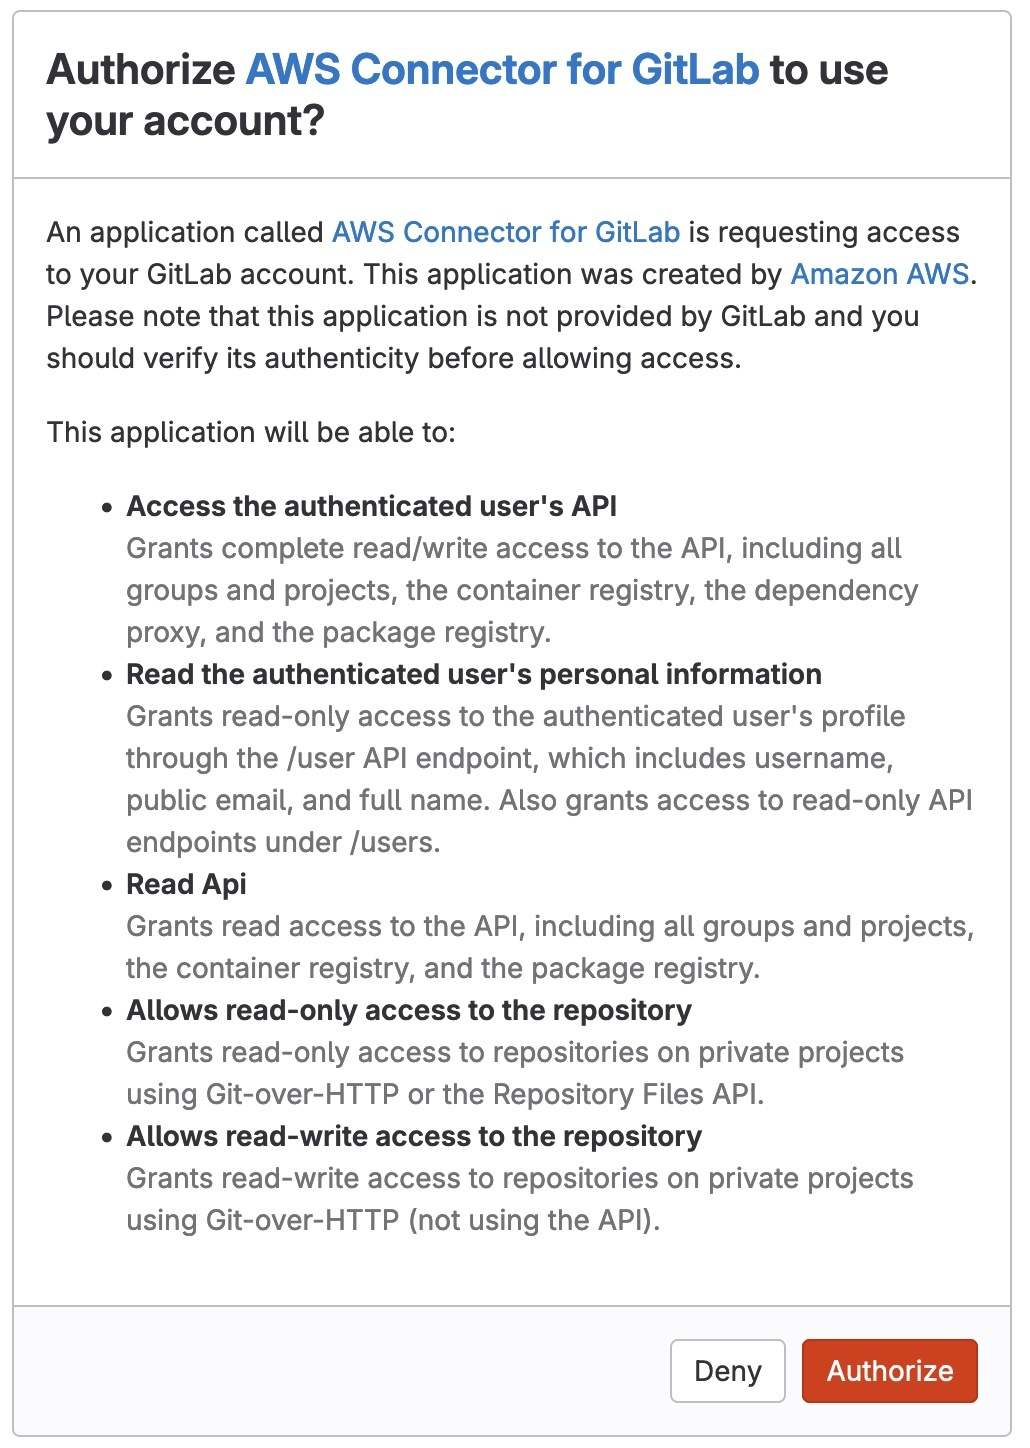 Screenshot showing the message to authorize the connection for your GitLab account.